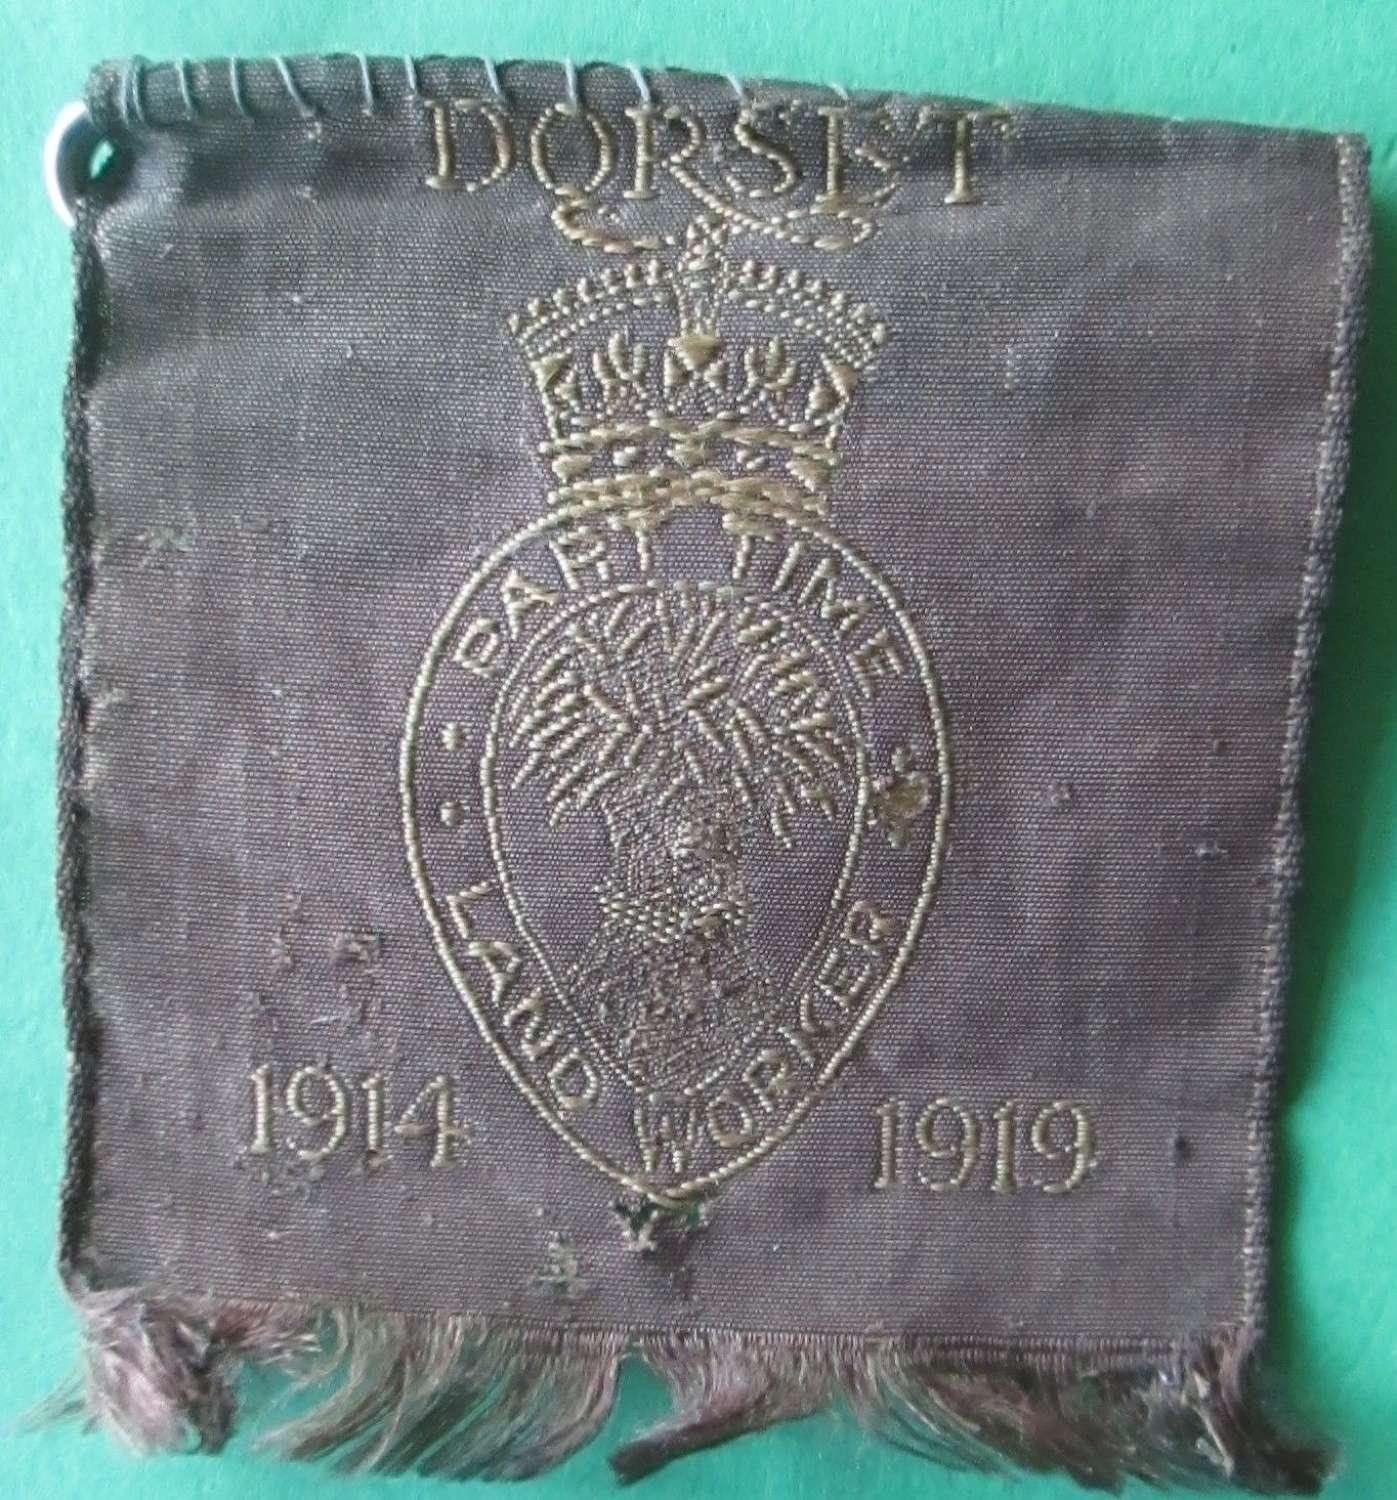 A WWI PERIOD PART TIME DORSET LAND WORKERS ARM BADGE